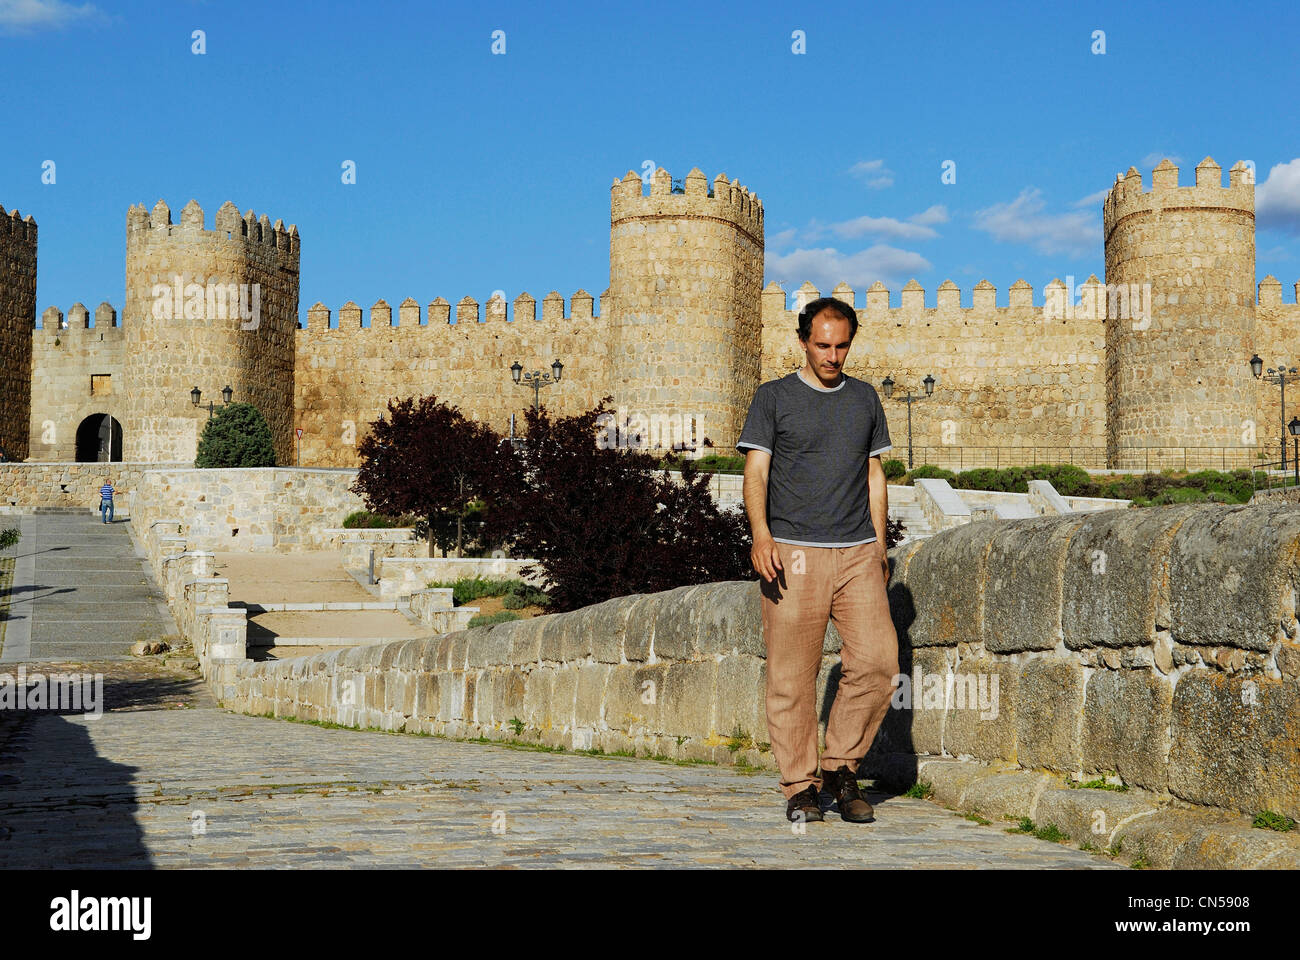 Spain, Castile and Leon, Avila, old city listed as World Heritage by UNESCO, roman bridge on Adaja river and medieval city Stock Photo